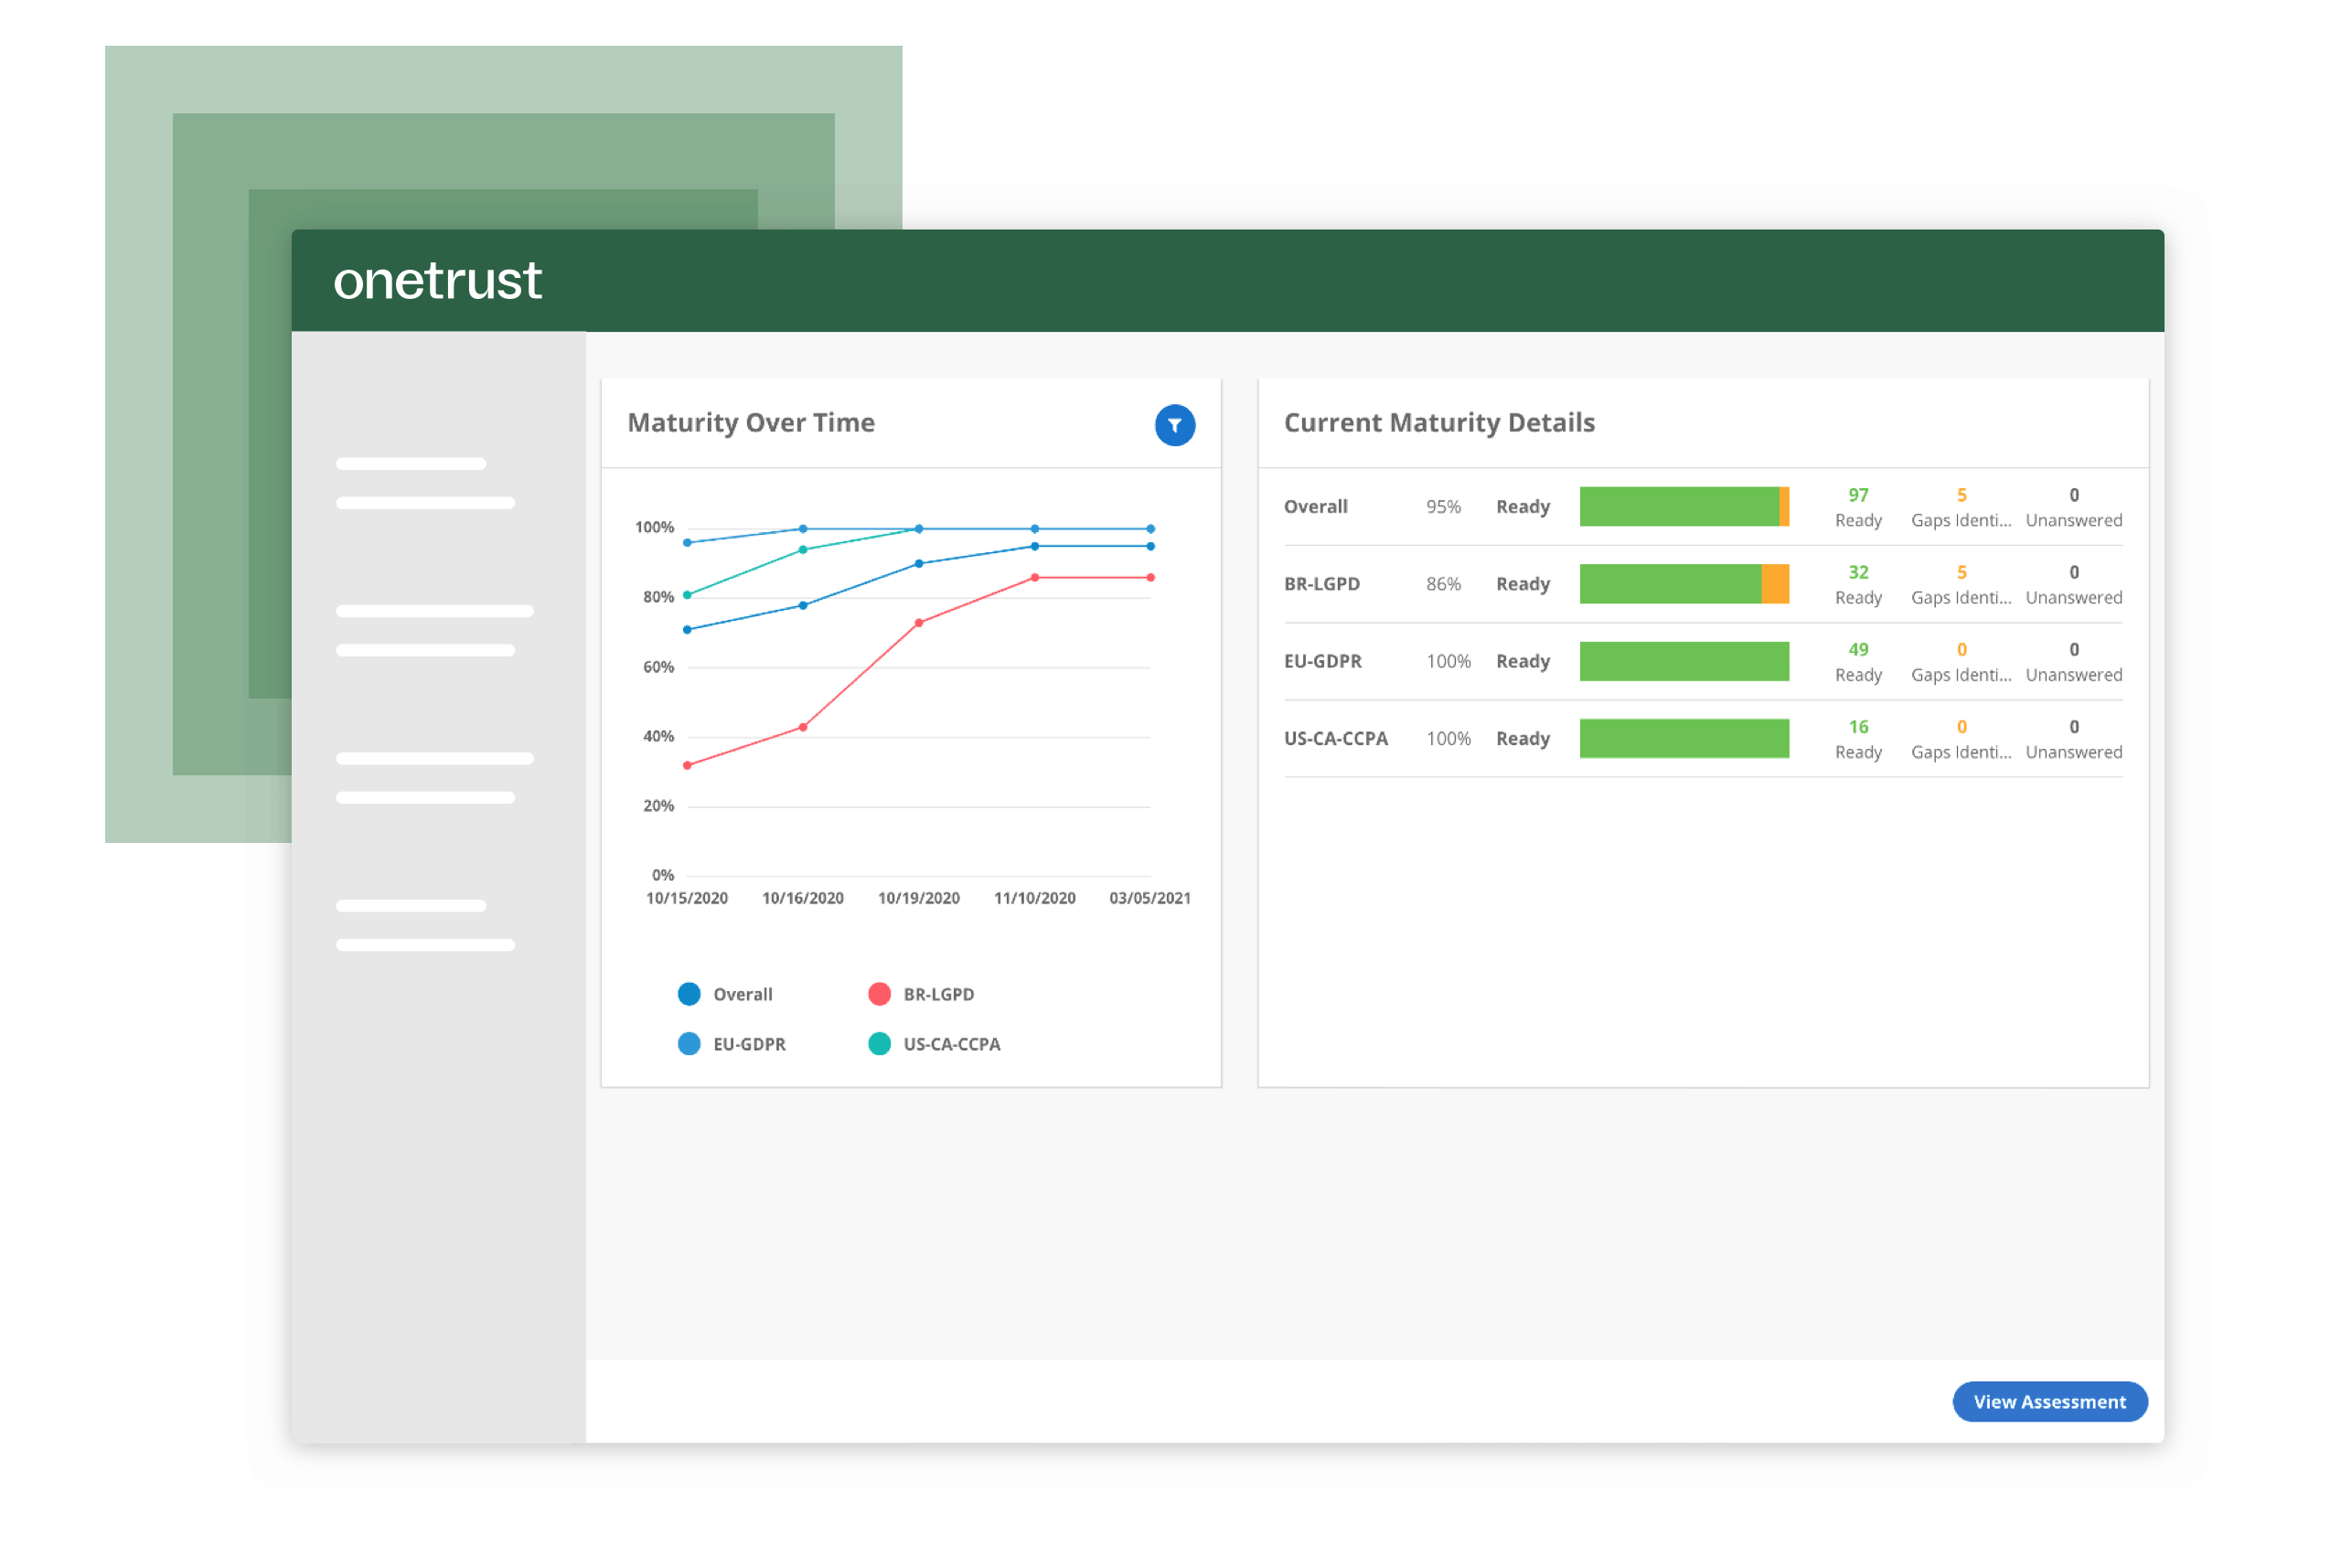 Screenshot from the OneTrust Trust Intelligence Cloud that shows an organization's compliance maturity over time as represented by data, line charts, and bar charts.